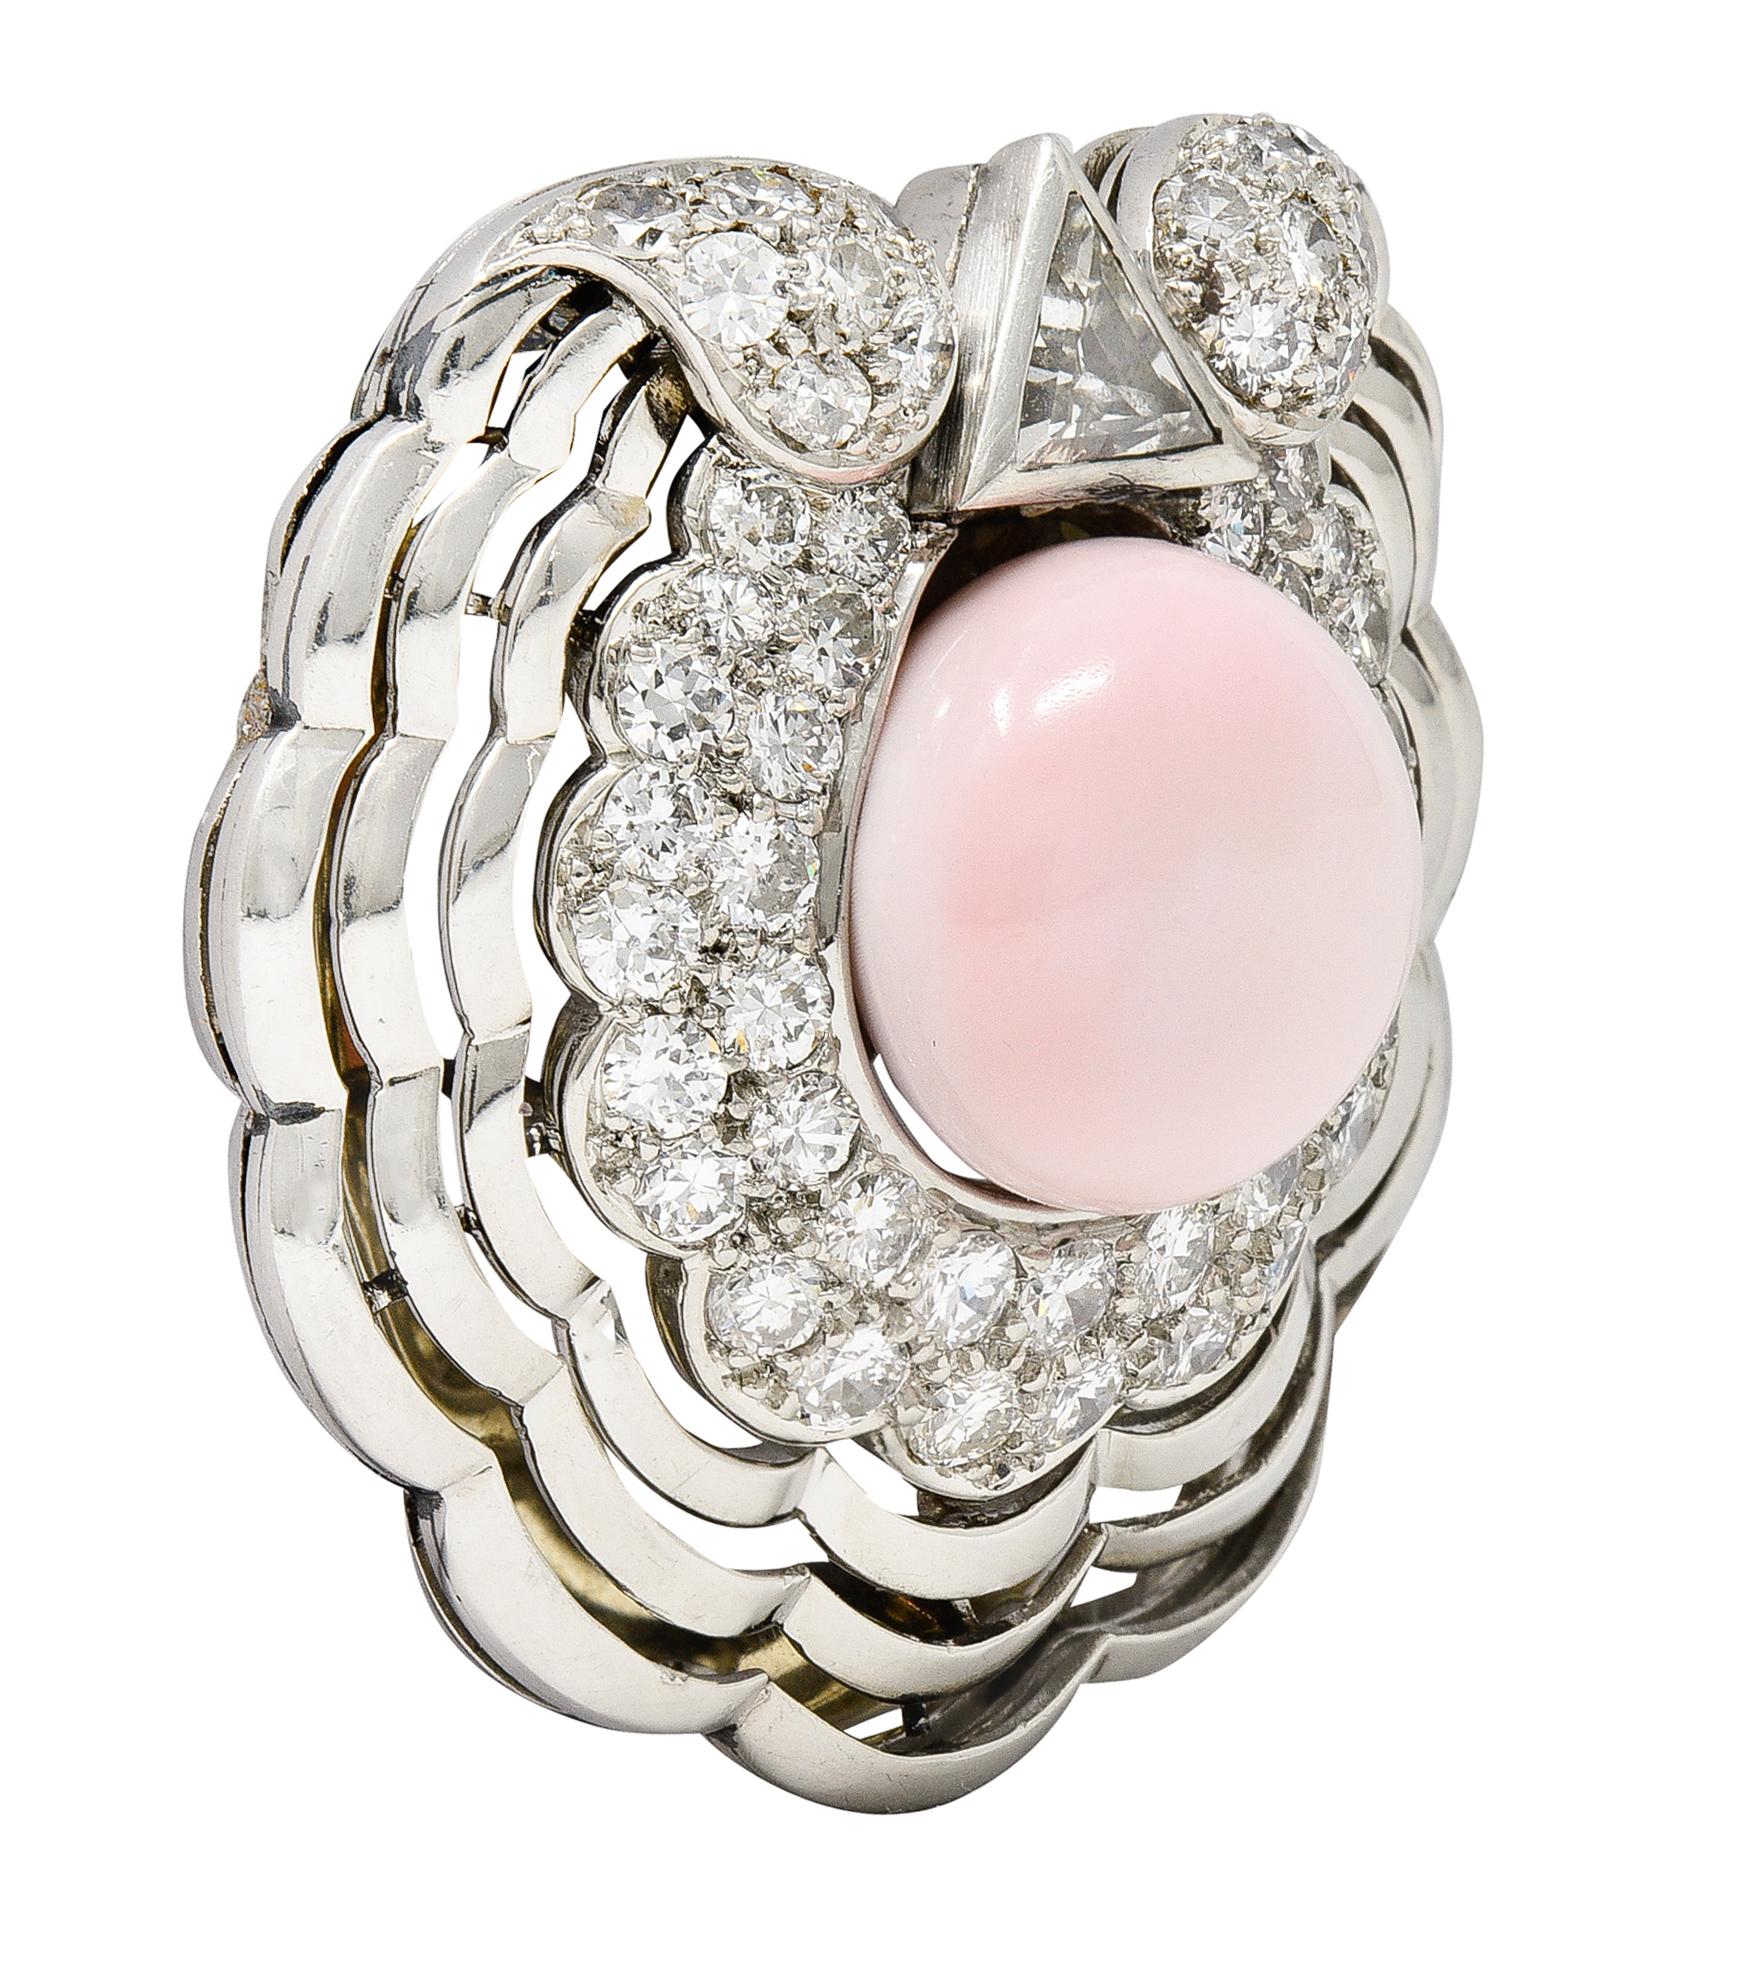 Centering a near-round conch pearl measuring 12.5 x 12.2 mm - opaque light pink in color. Natural saltwater in origin - with a fanning pierced shell motif surround. Featuring a surround of transitional and old European cut diamonds. With an